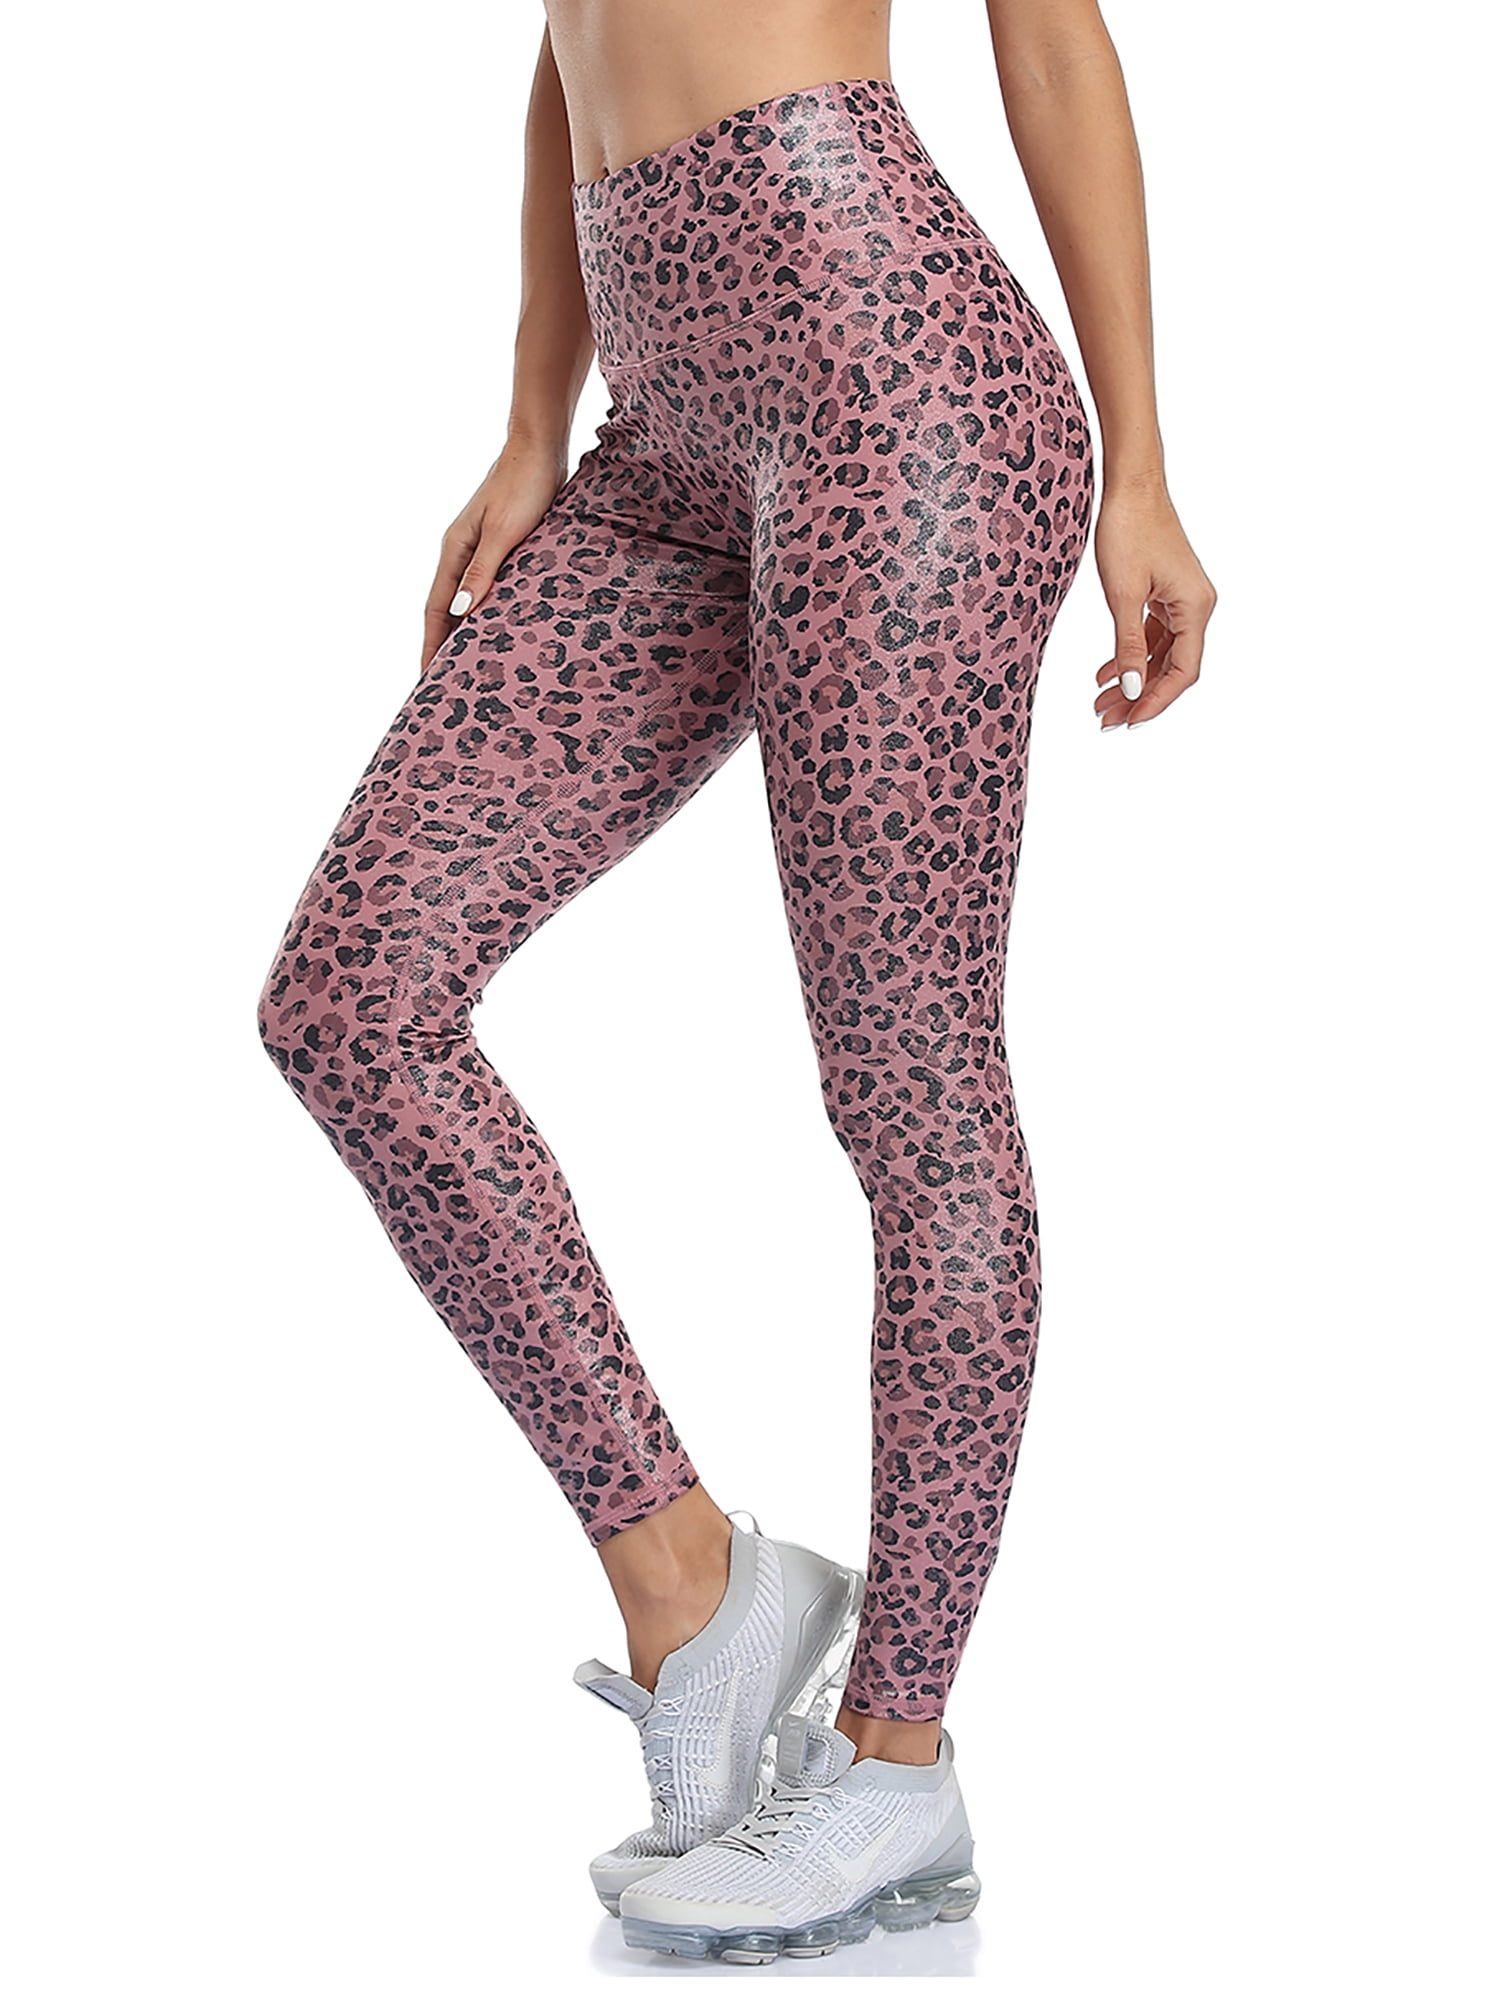 Thermal Fleece Lining Faux Leather Leggings For Women Leopard Print Liquid  Shine Winter Printed Pants 